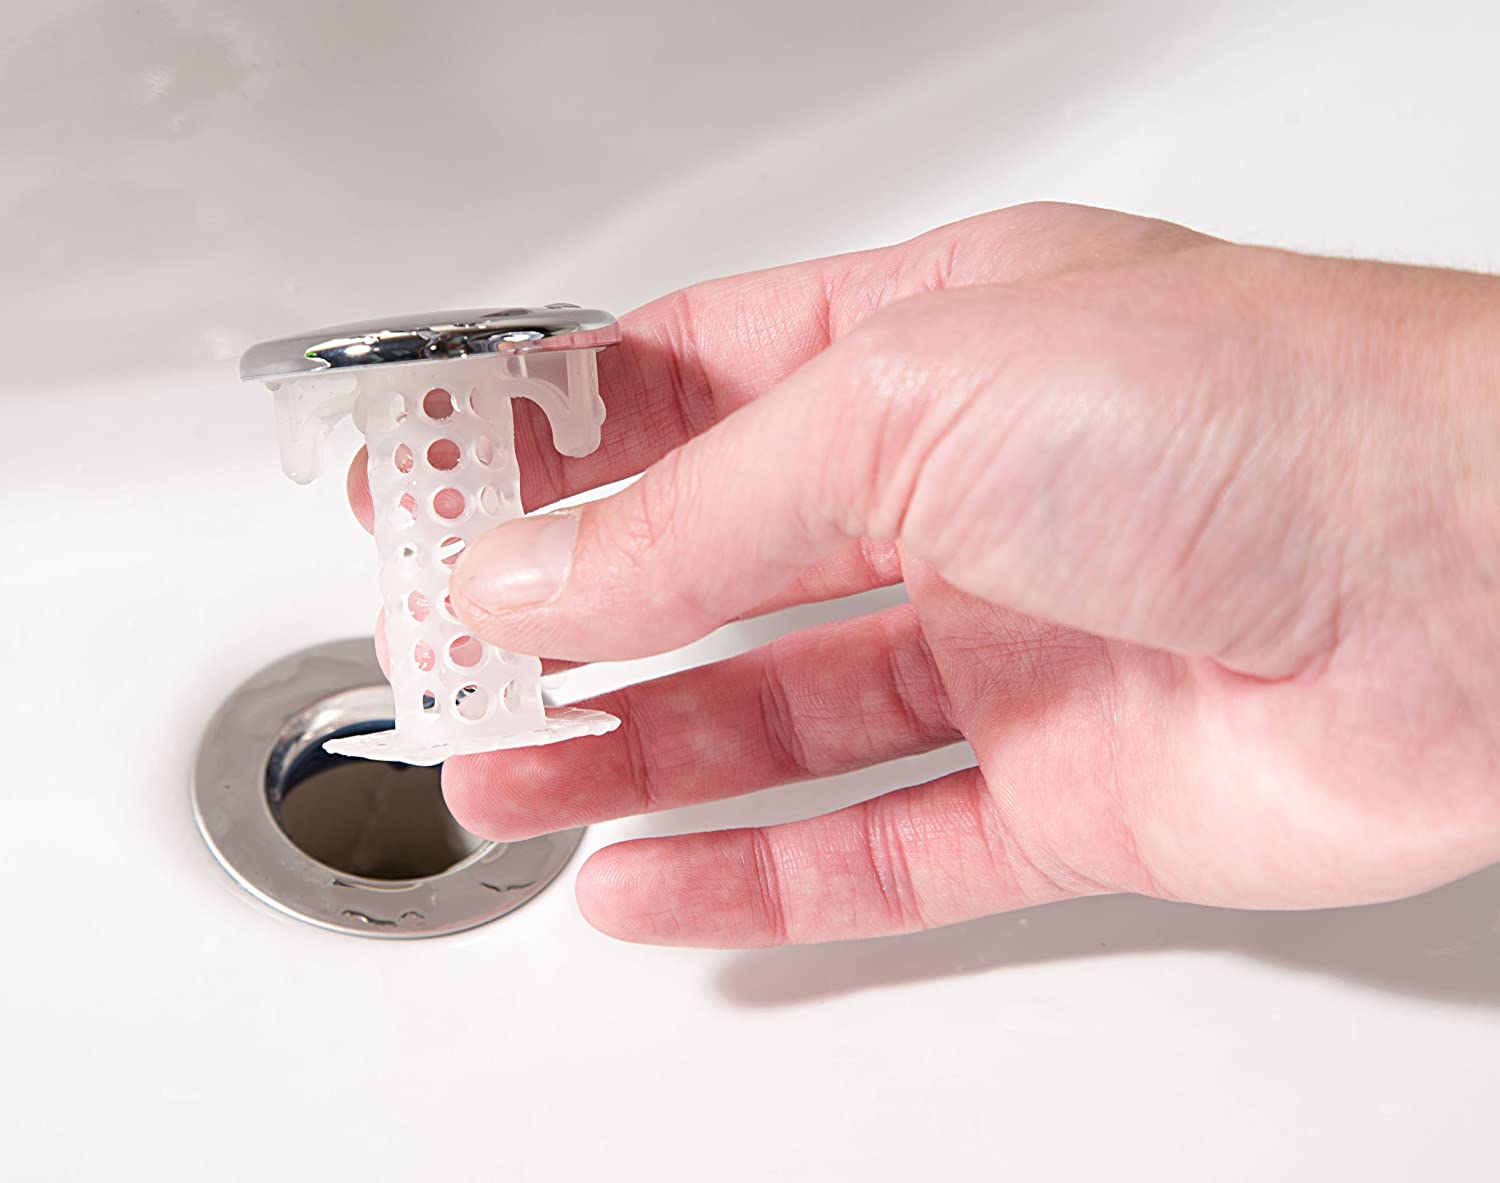 A human hand holds the chrome SinkShroom in preparation to install it in an empty drain